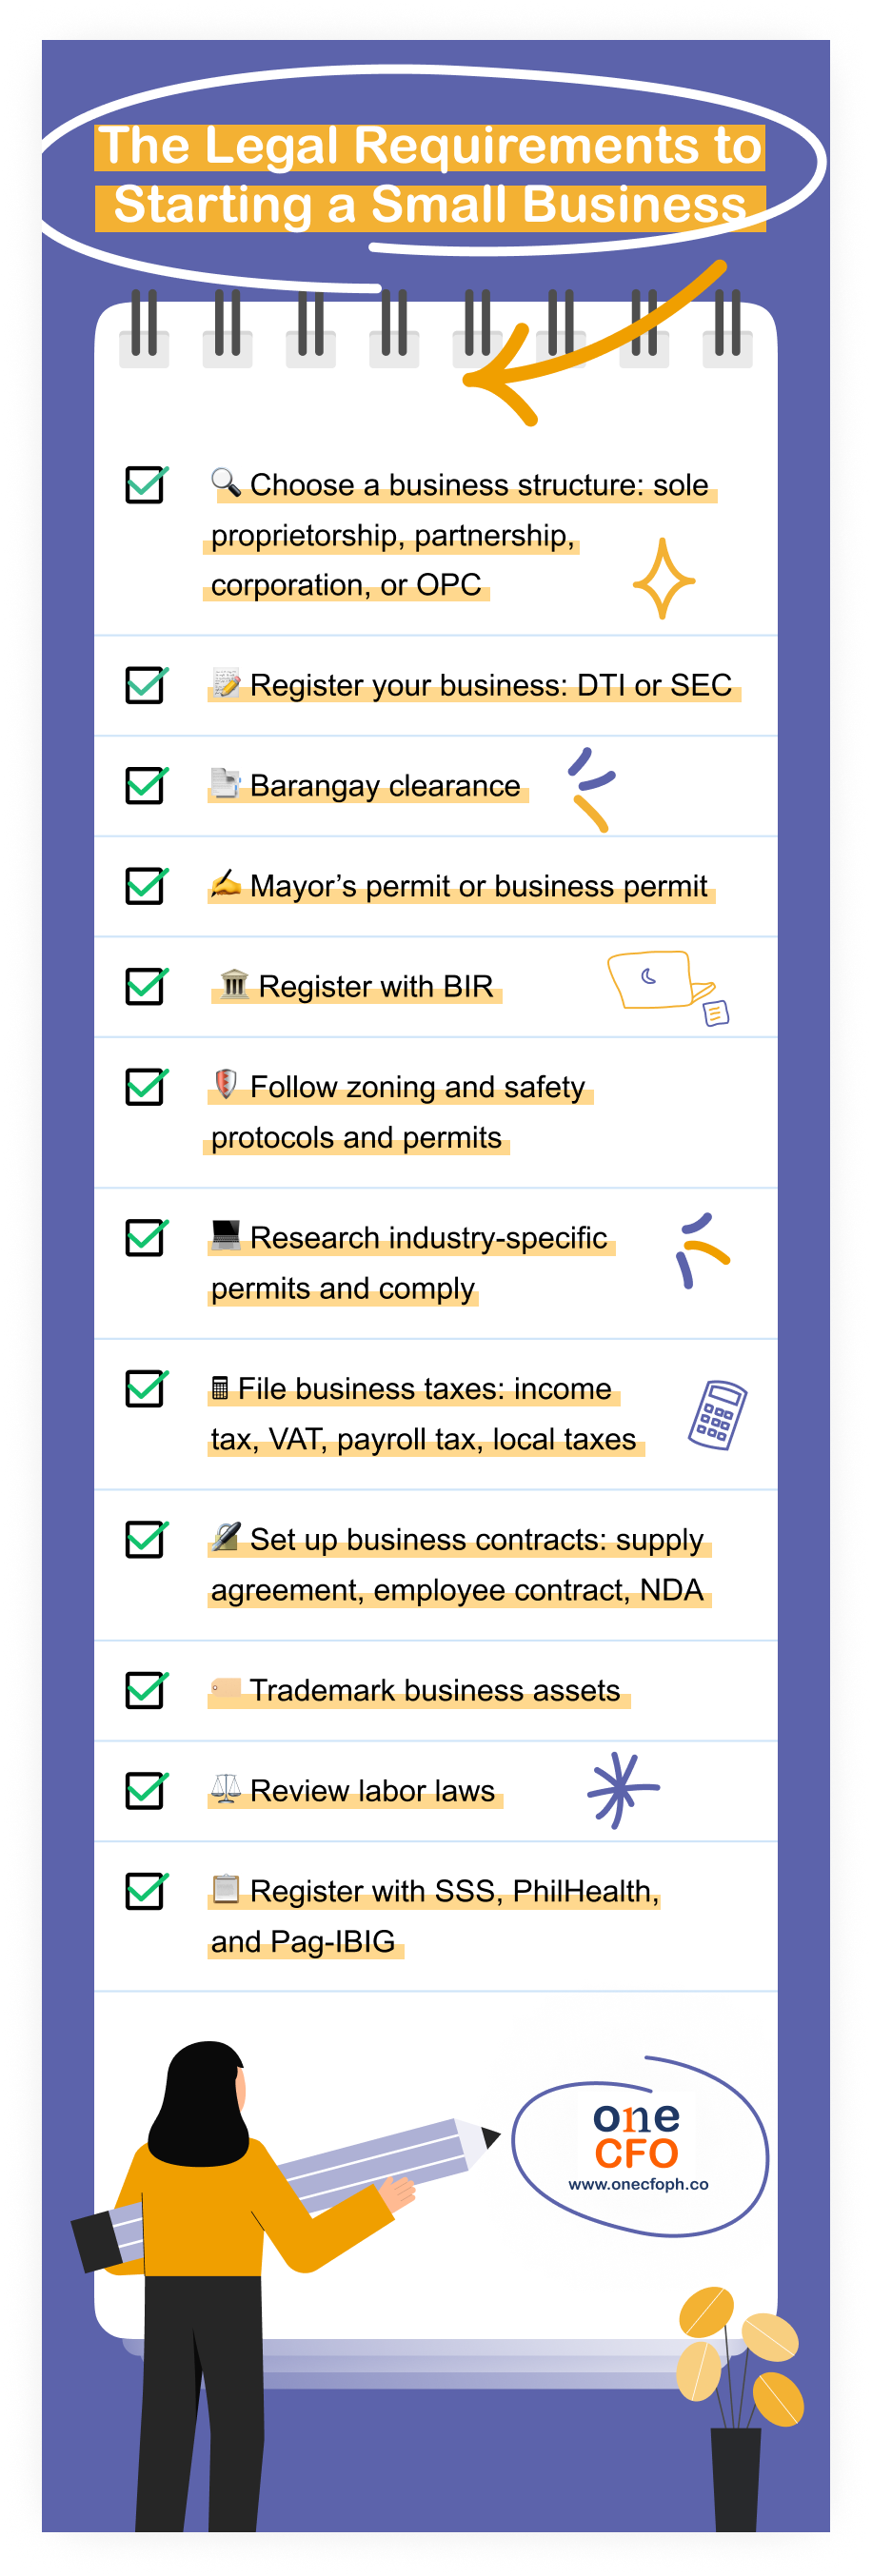 Legal Requirements Checklist for a Small Business